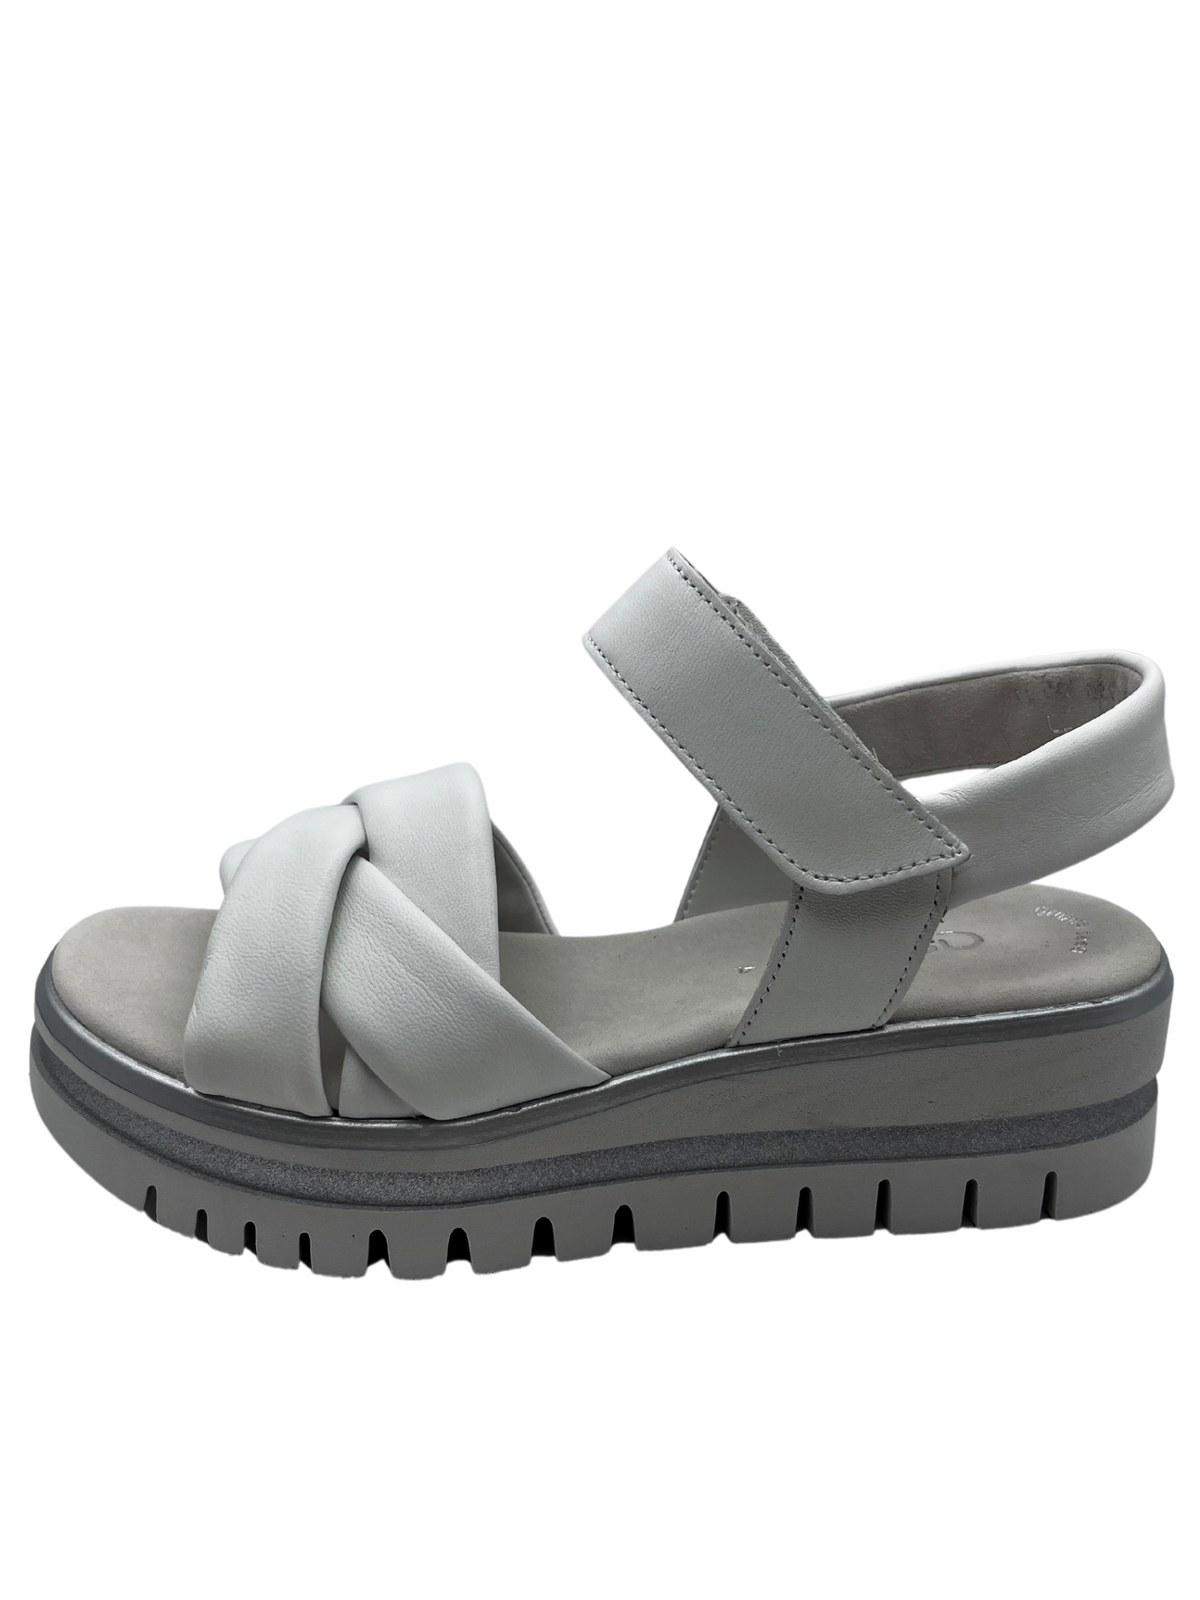 Gabor White Wedge CrossOver Leather Sandals